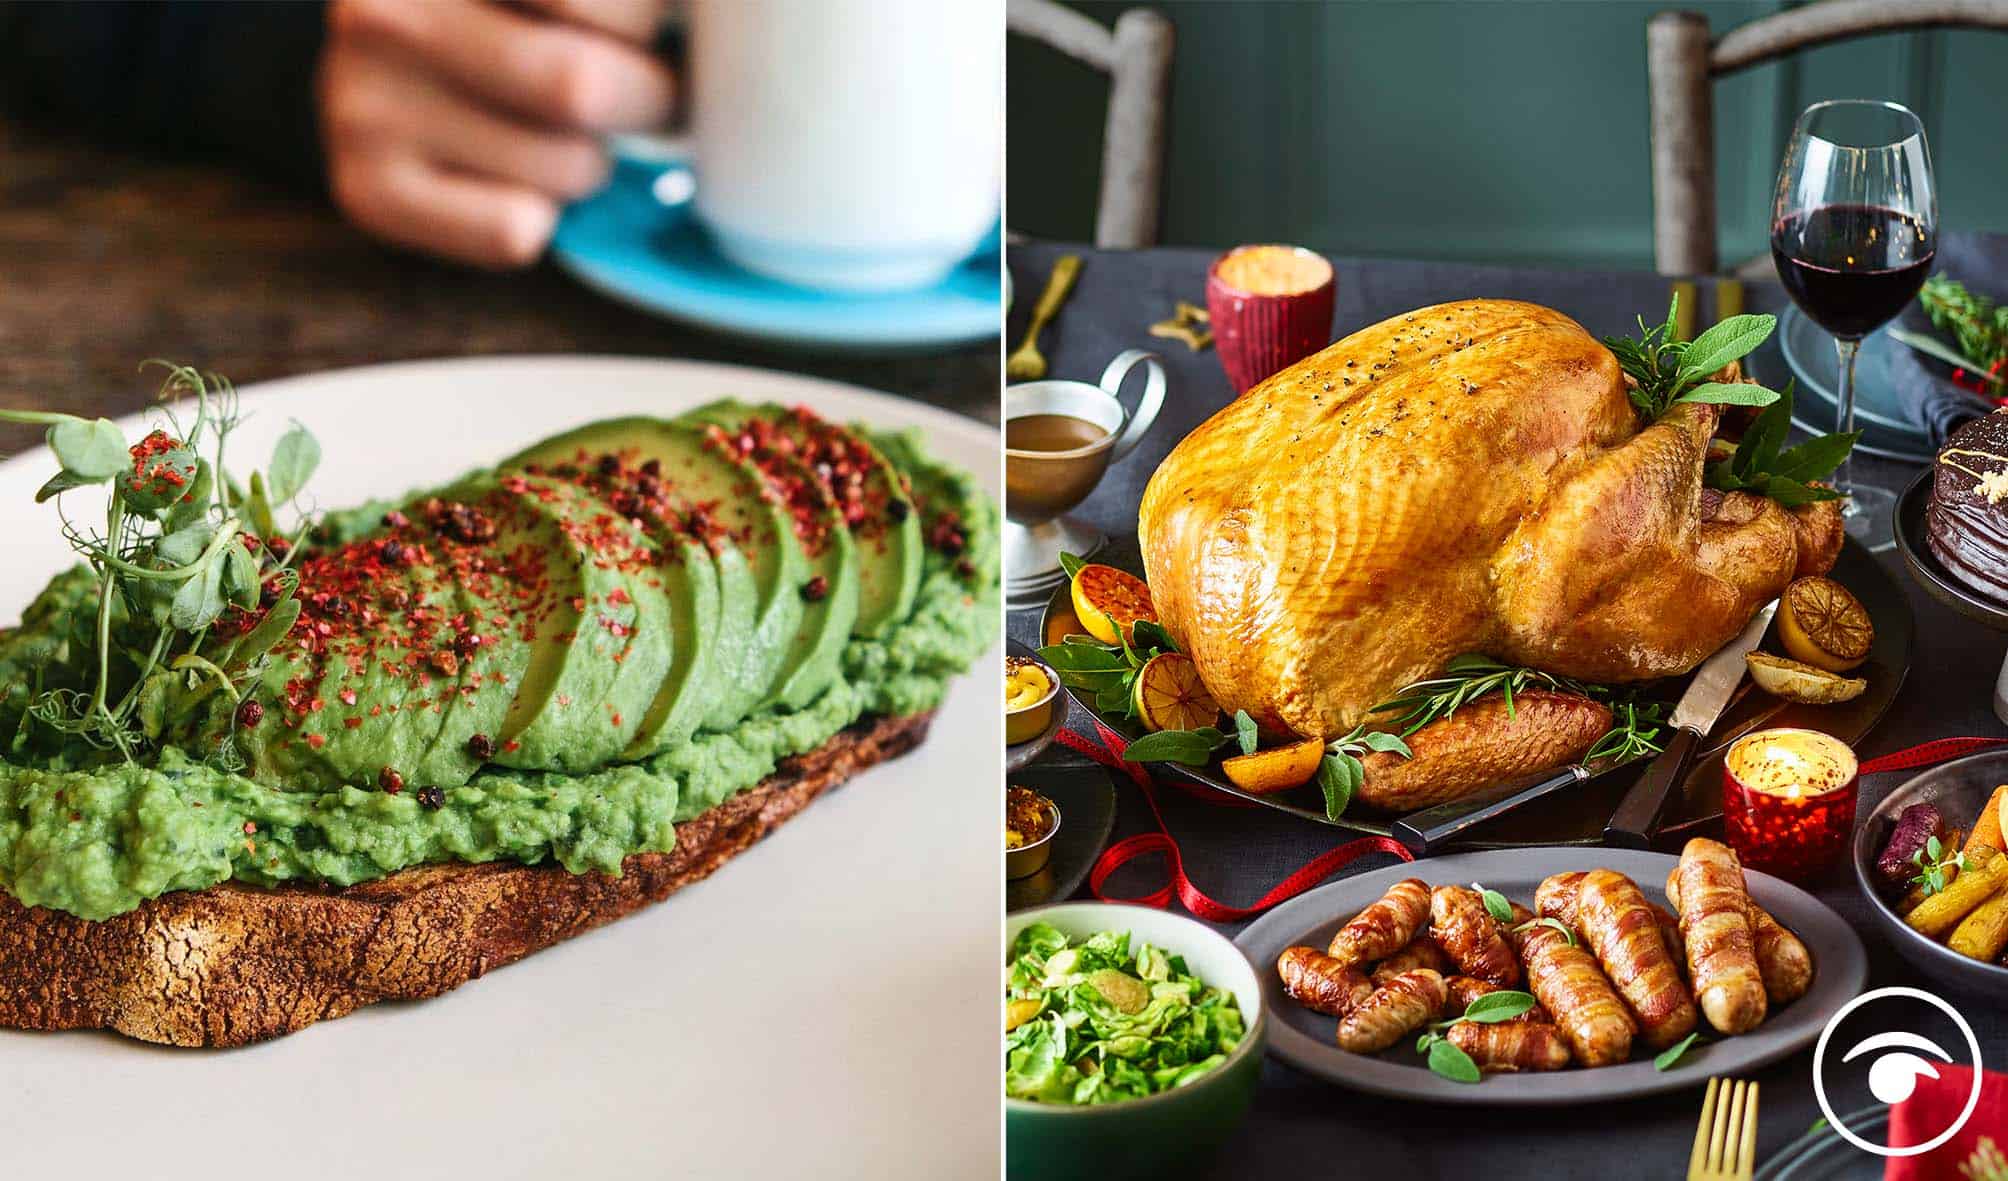 Fifth of young adults would choose brunch over traditional Christmas dinner